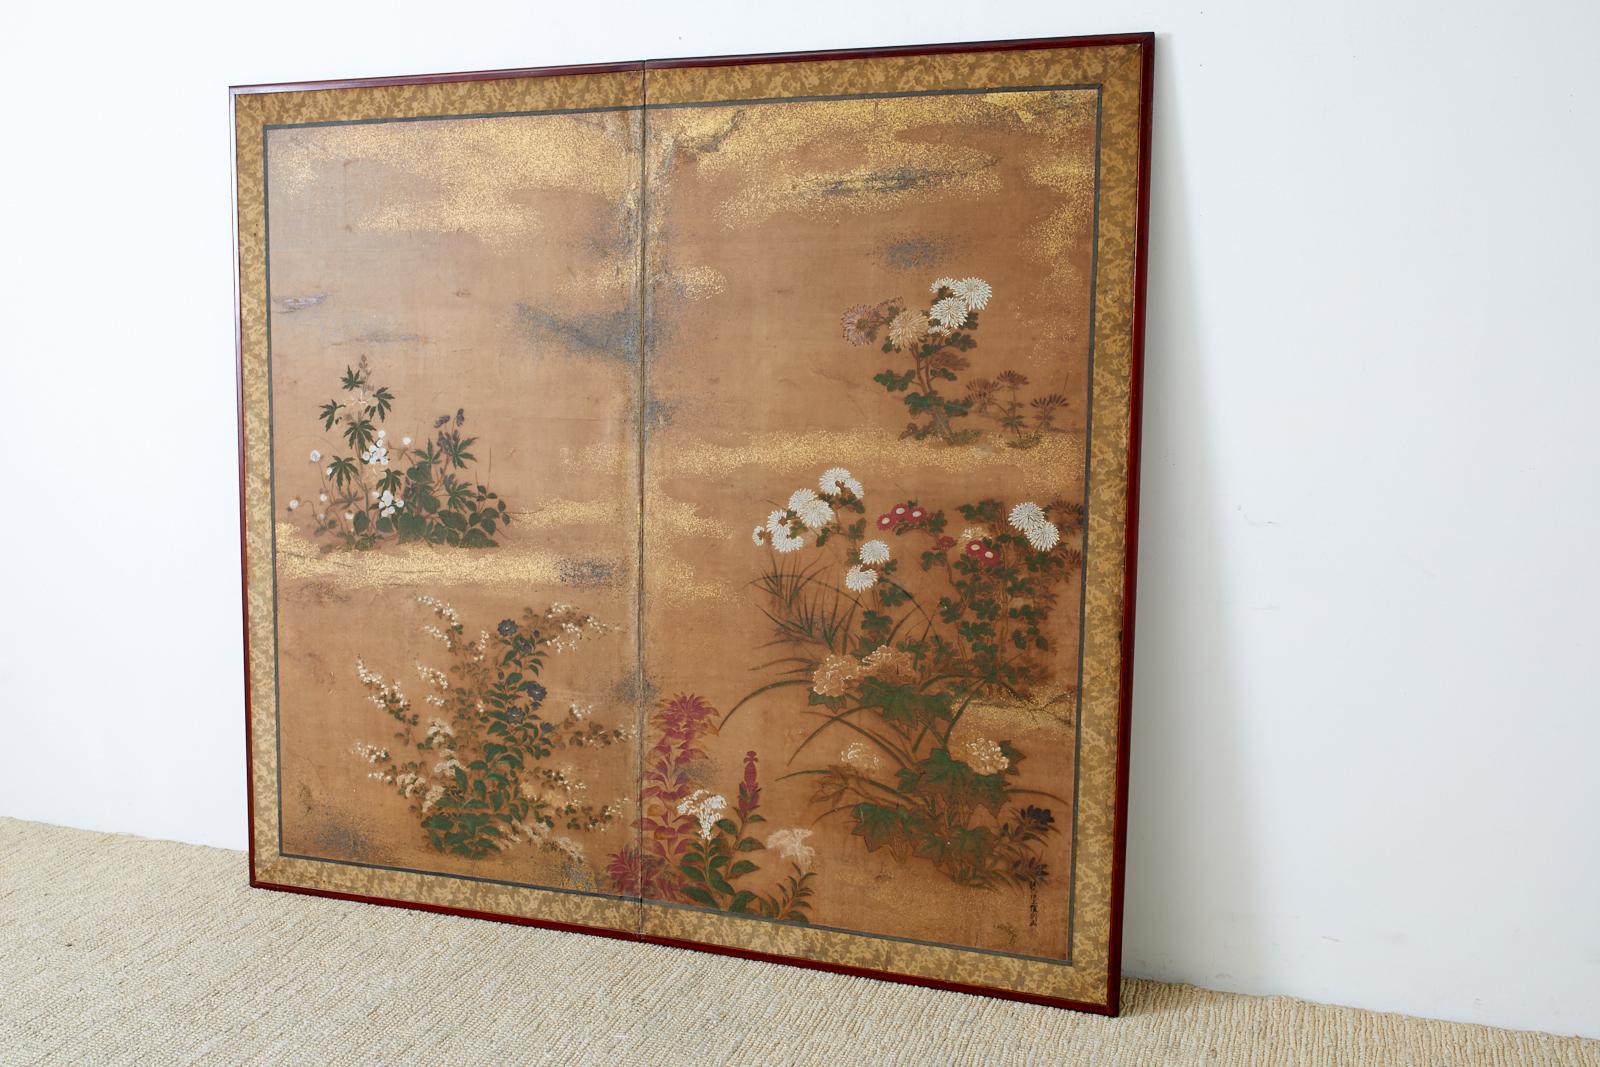 Impressive early 19th century Japanese Edo period two-panel screen featuring flowering plants and grasses of autumn. Painted in the Tosa School style Bunka Bunsei period or Ogosho period (1804-1829) signed Juroki-i-jo (upper junior sixth rank)